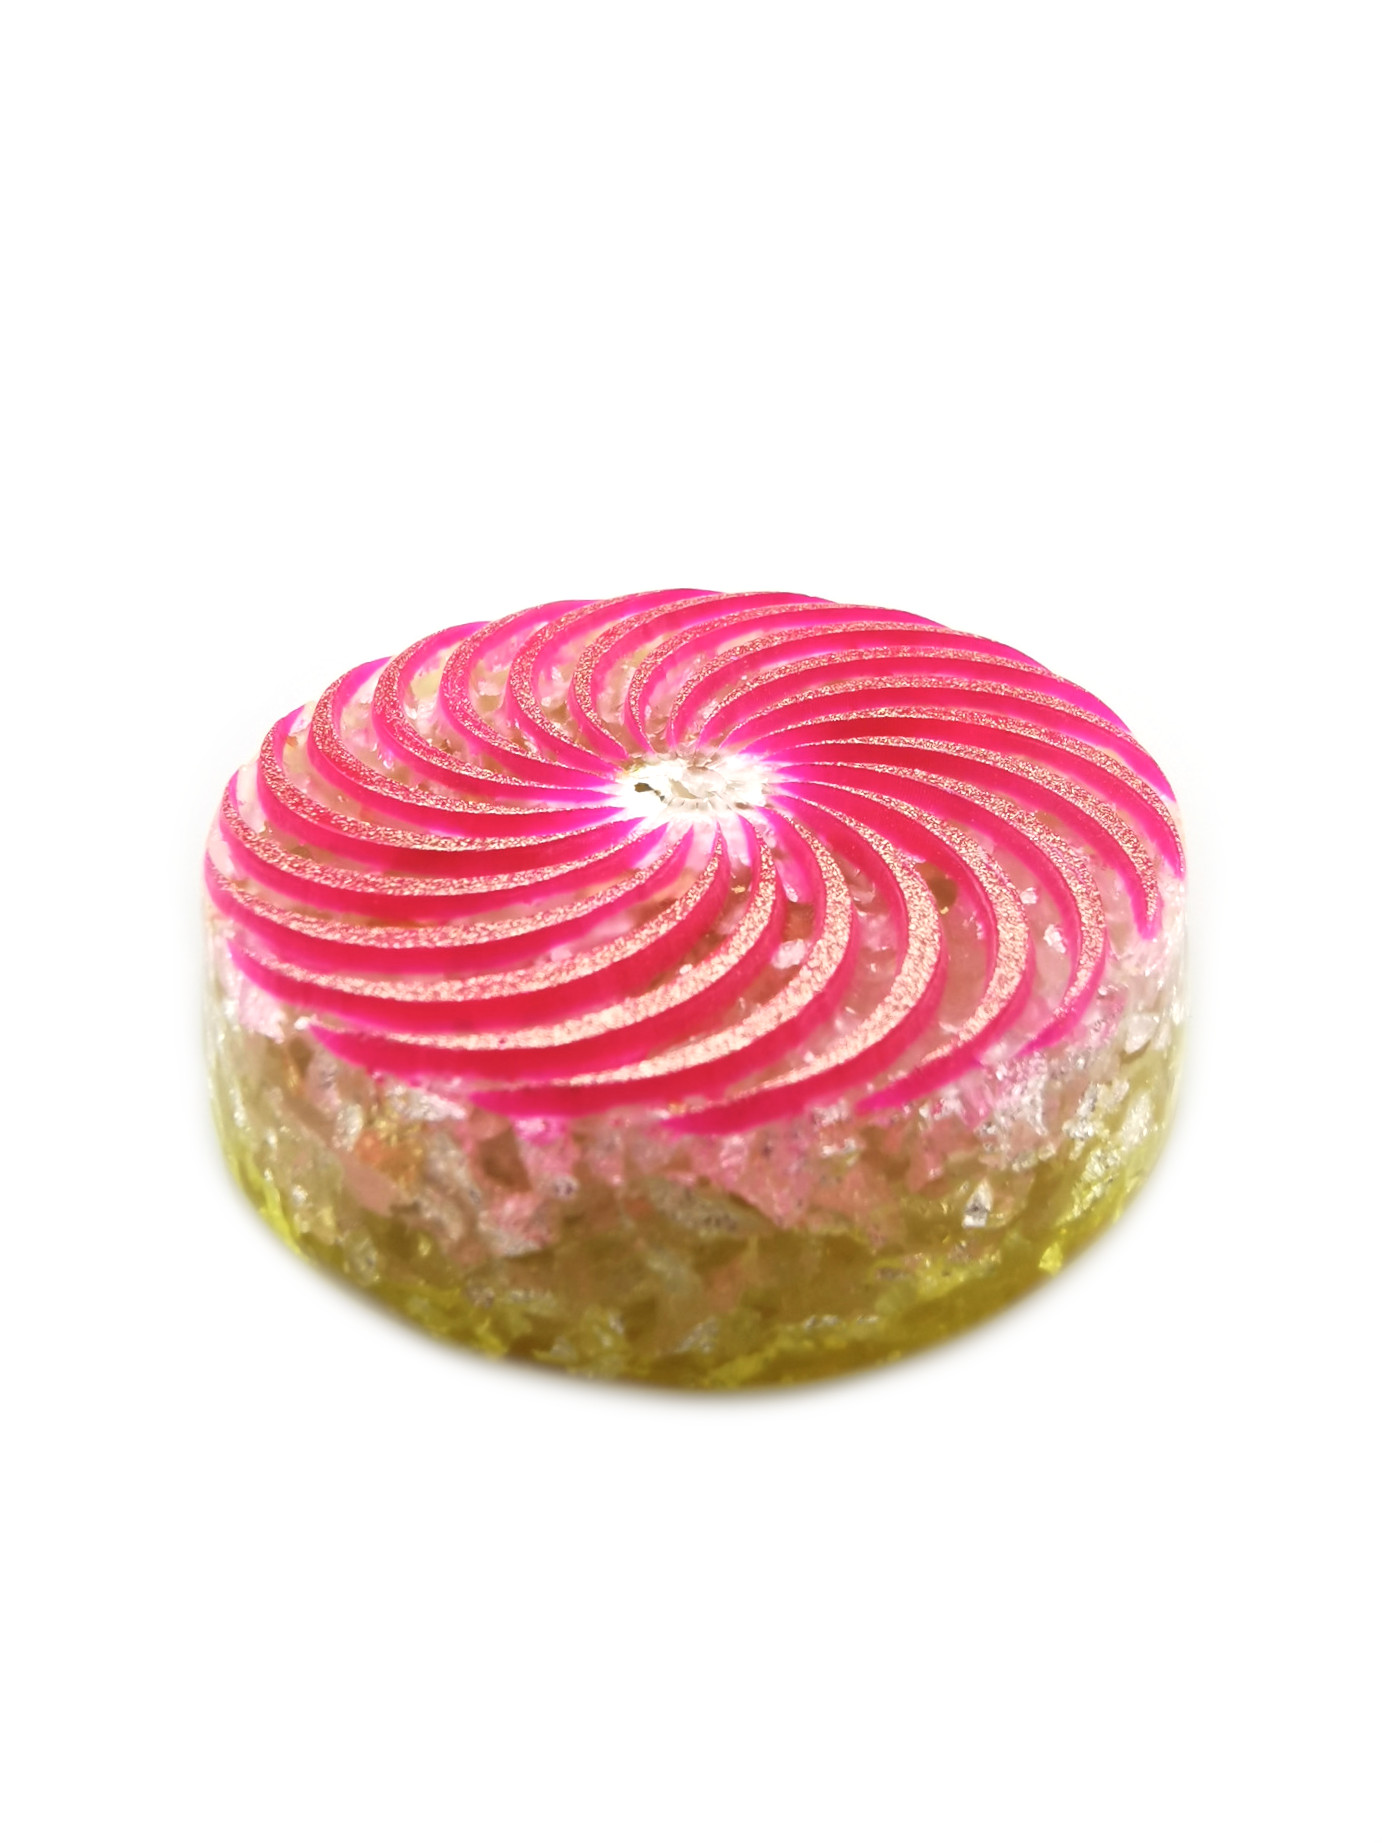 Pink and Yellow Vortex Orgone Energy Puck by OrgoneVibes